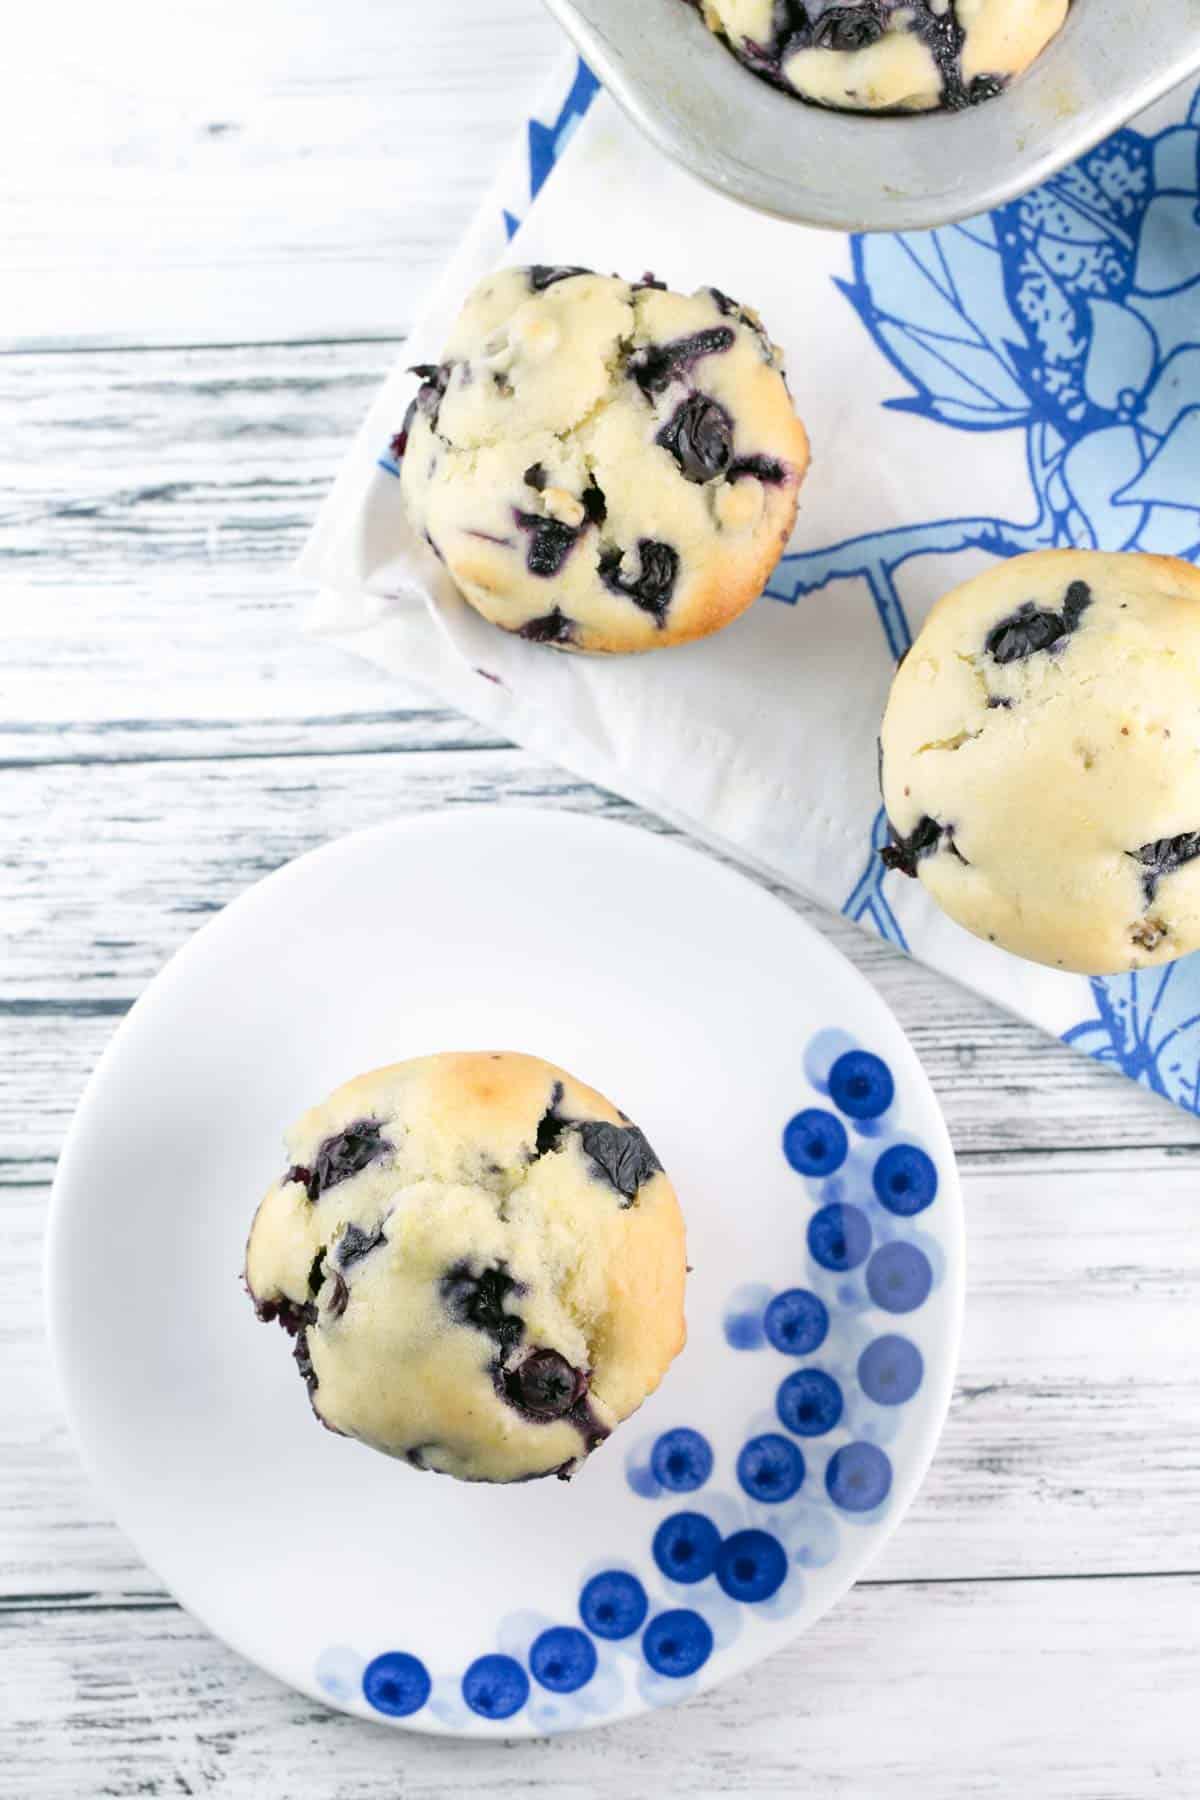 Low Sugar Skinny Blueberry Muffins: trade in your jumbo sugary muffin for a skinny blueberry muffin. All the great blueberry taste you love with none of the guilty. {Bunsen Burner Bakery} #muffins #blueberrymuffins #breakfast #skinnymuffins